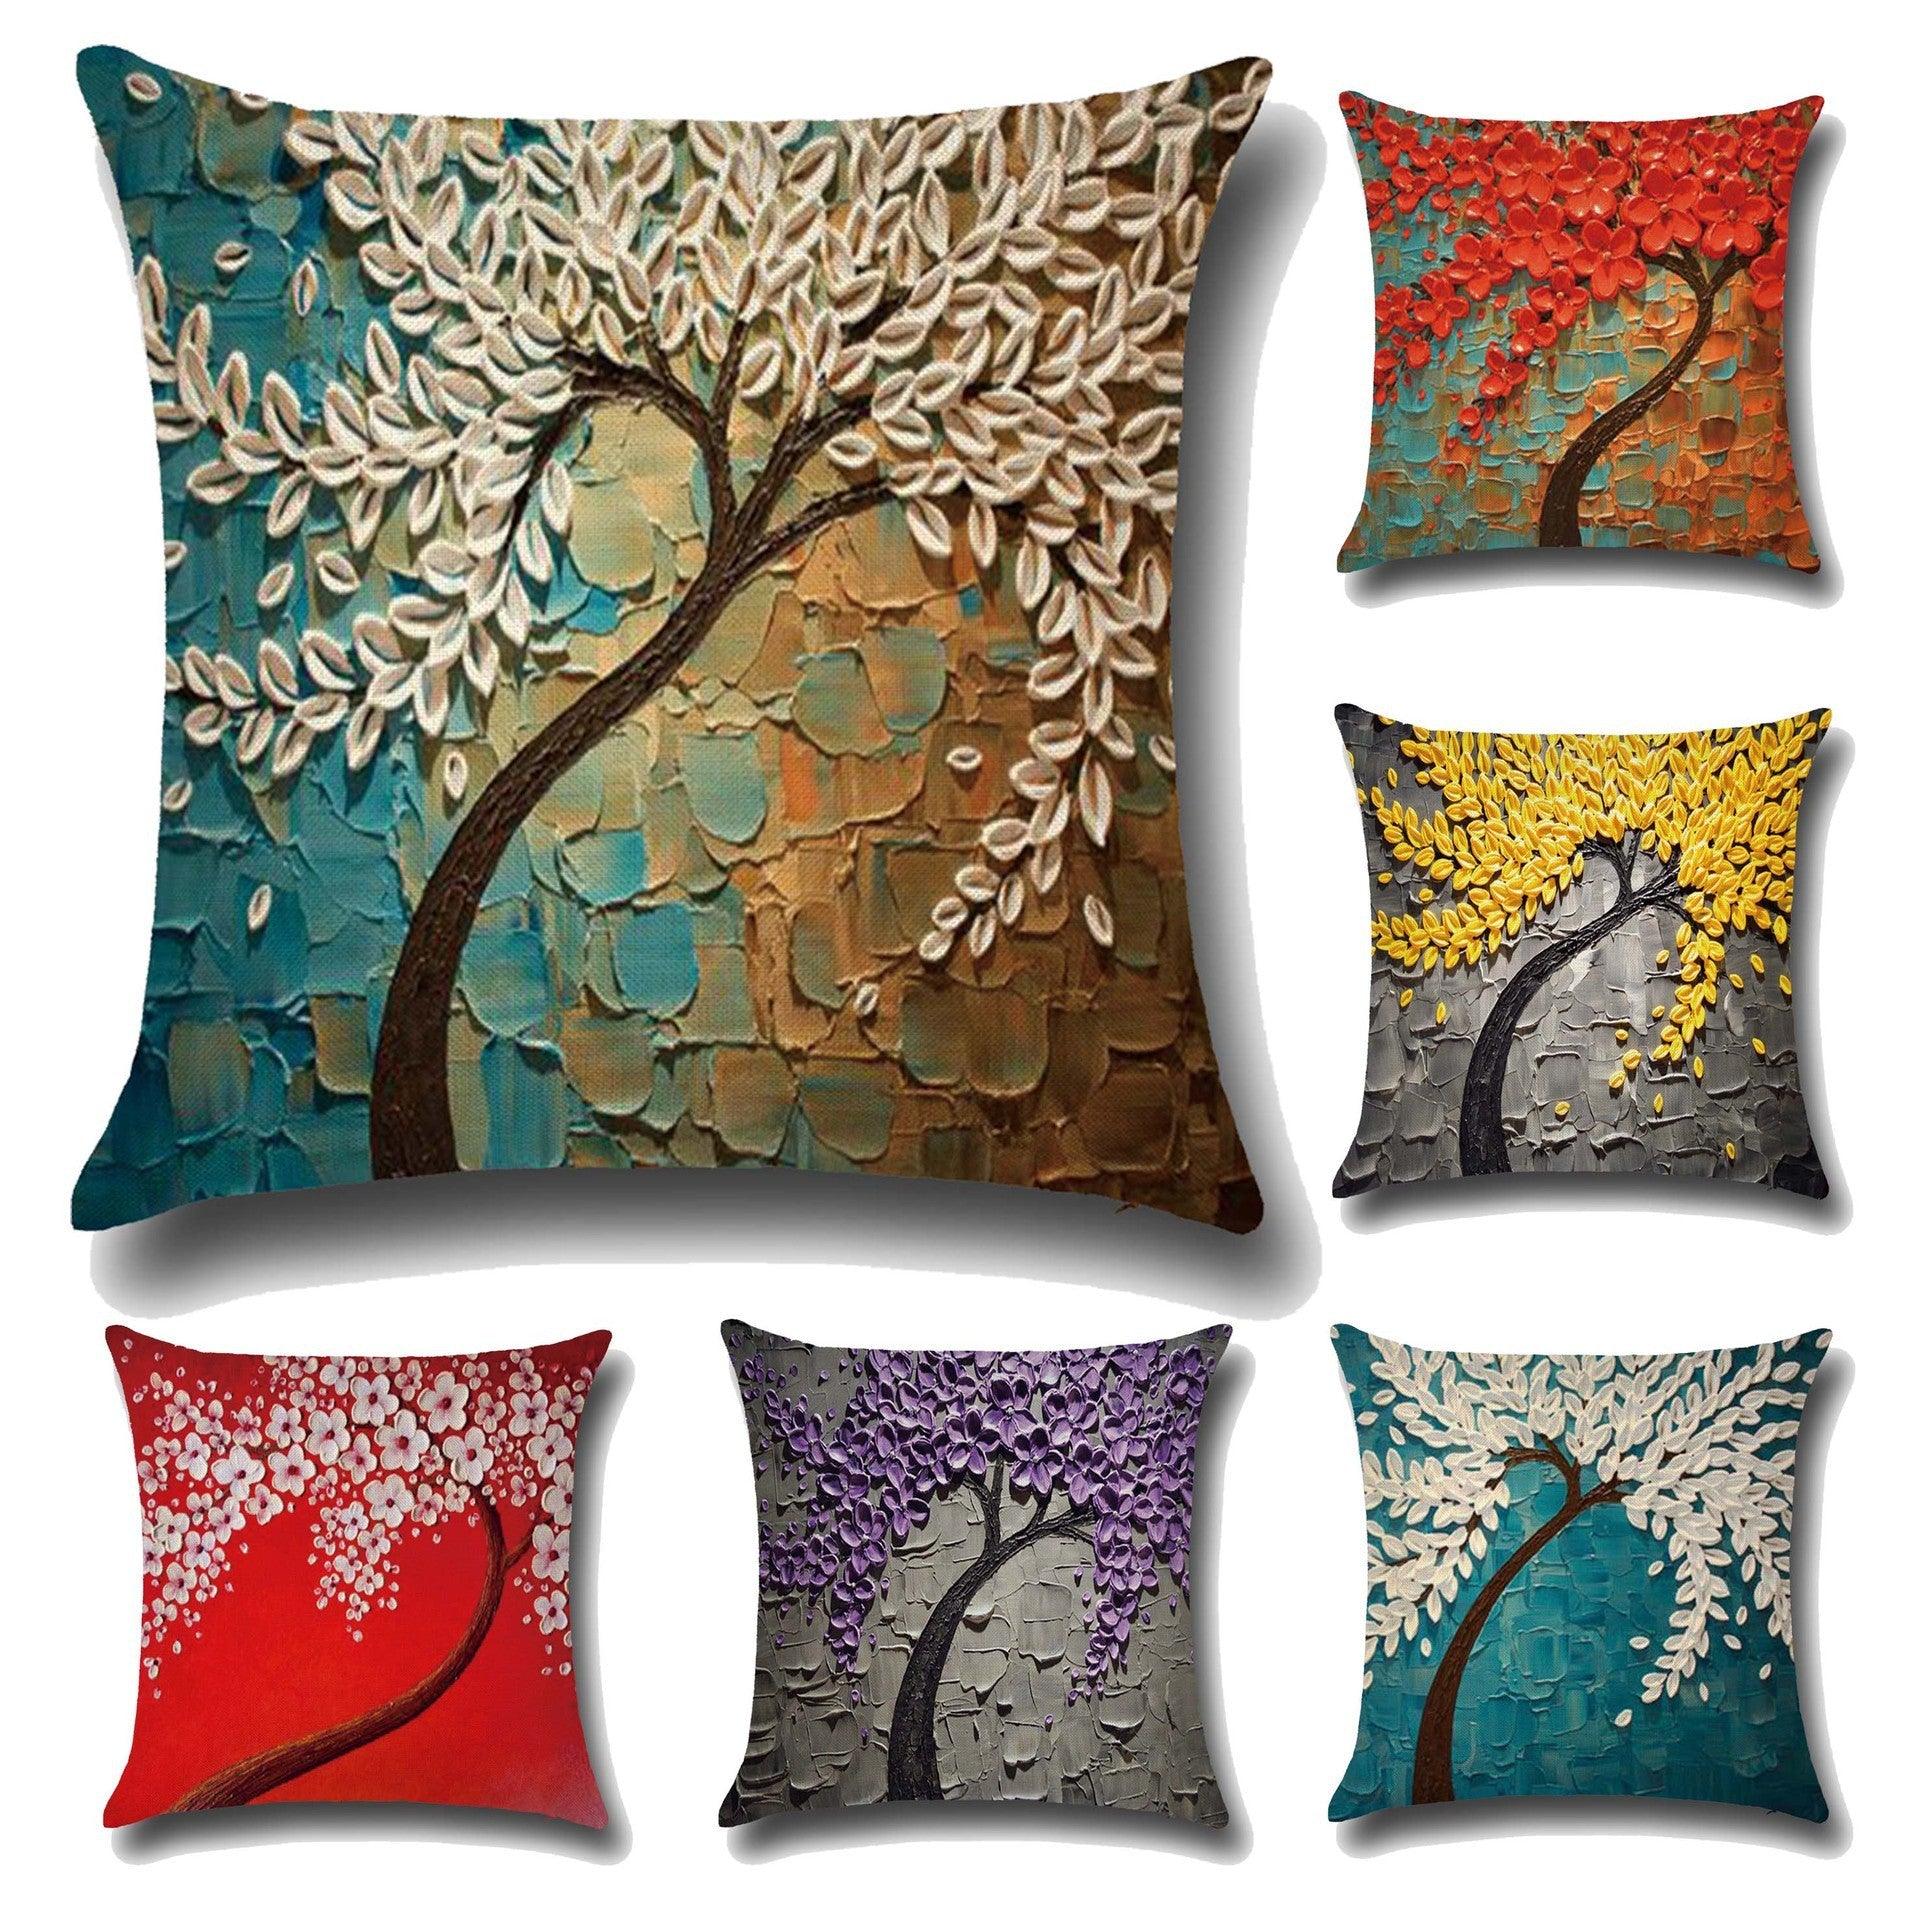 Artistic Essence: Three-Dimensional Oil Painting Trees and Flowers Cotton Cushion Cover  